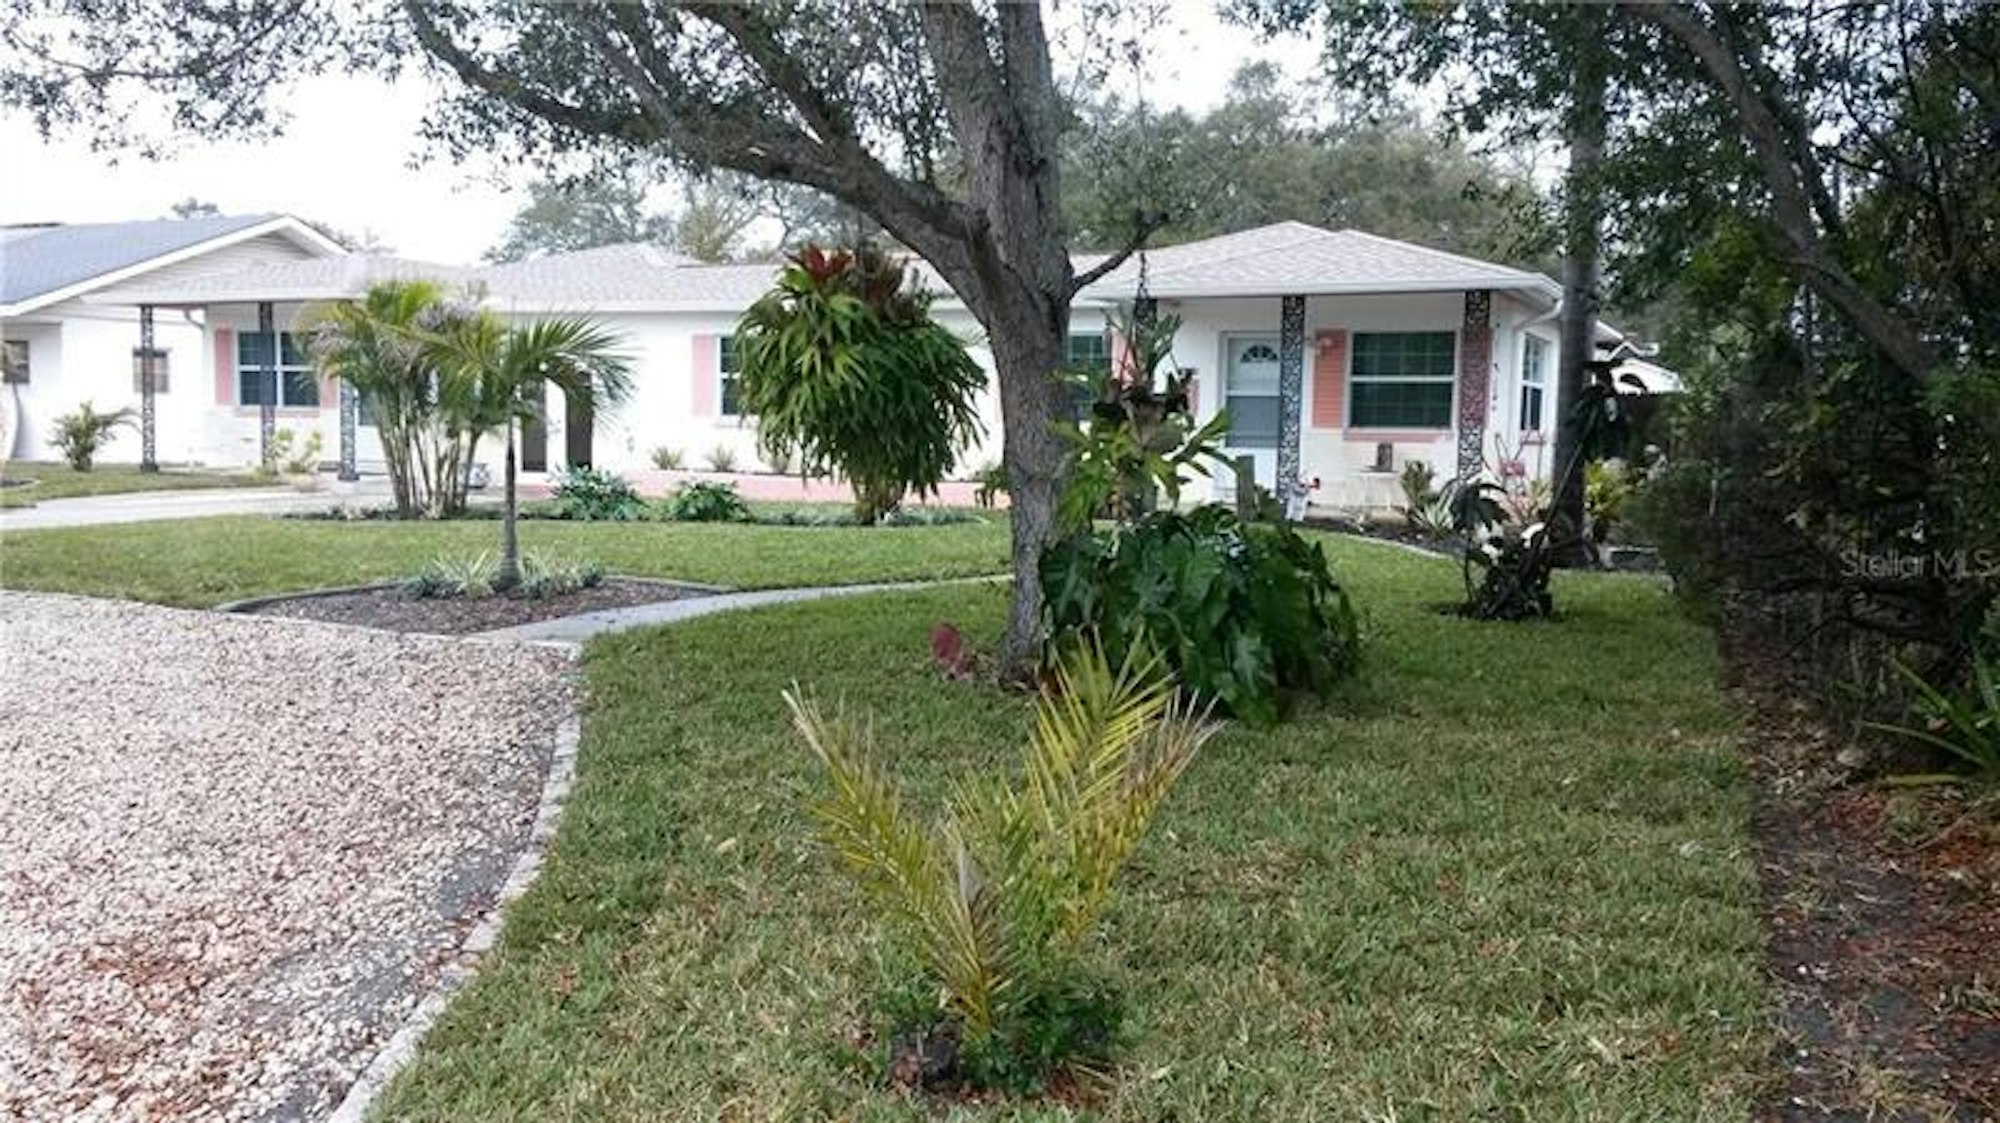 Photo 1 of 25 - 5703 25th Ave S, Gulfport, FL 33707